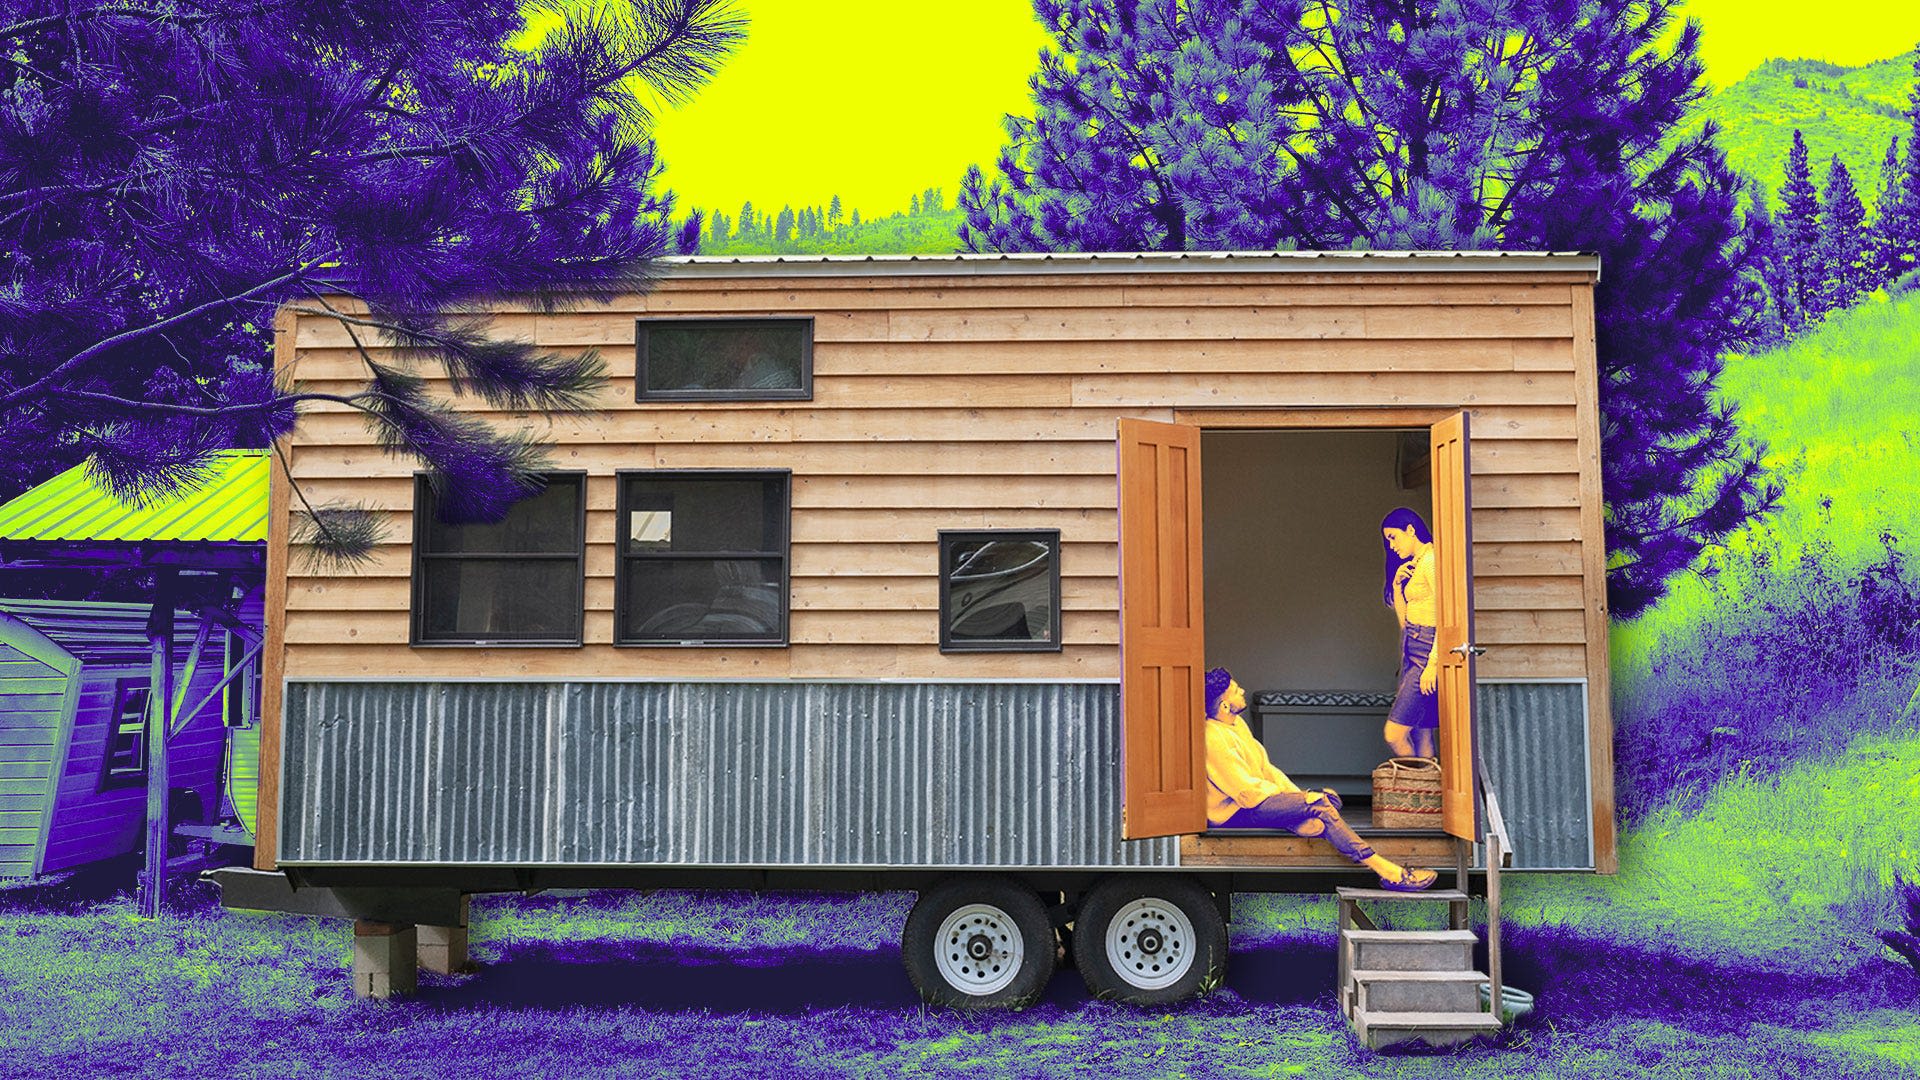 Why Buying a Tiny Home Is Perfect for My Tiny Budget